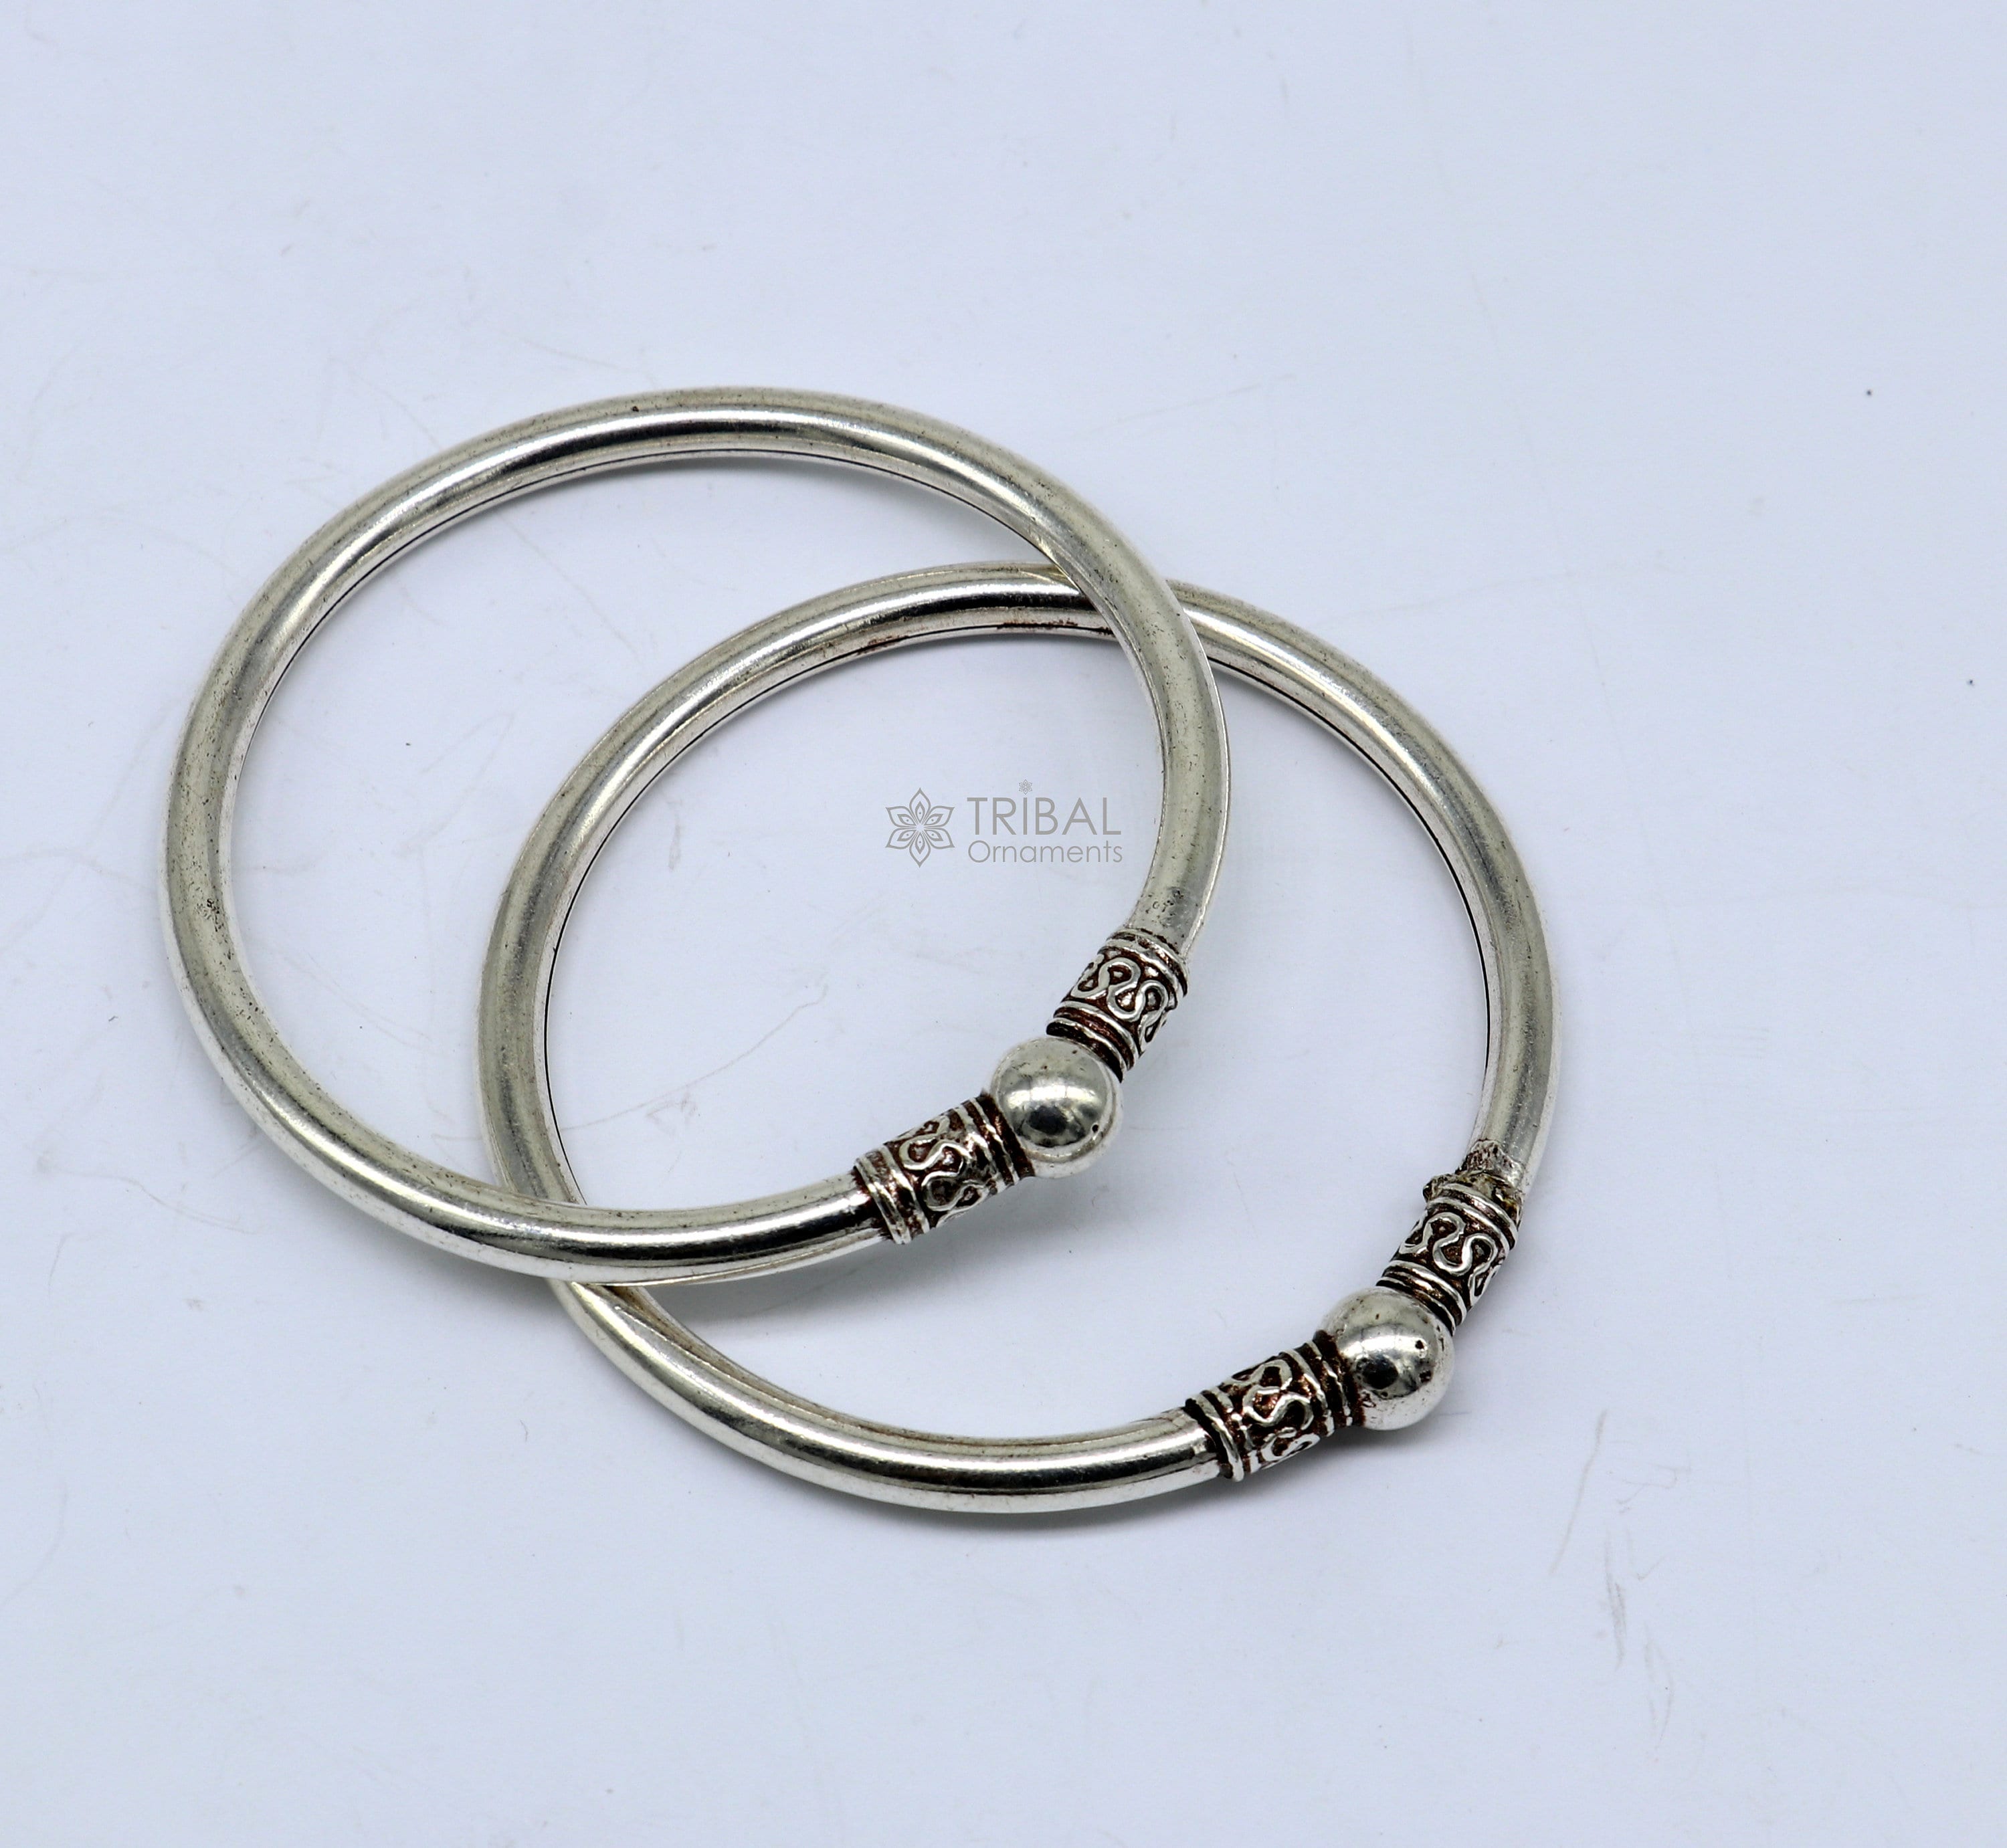 925 sterling silver handmade unique cultural design trendy kada bracelet  for men's and girl's, best delicate Light weight jewelry nsk664 | TRIBAL  ORNAMENTS